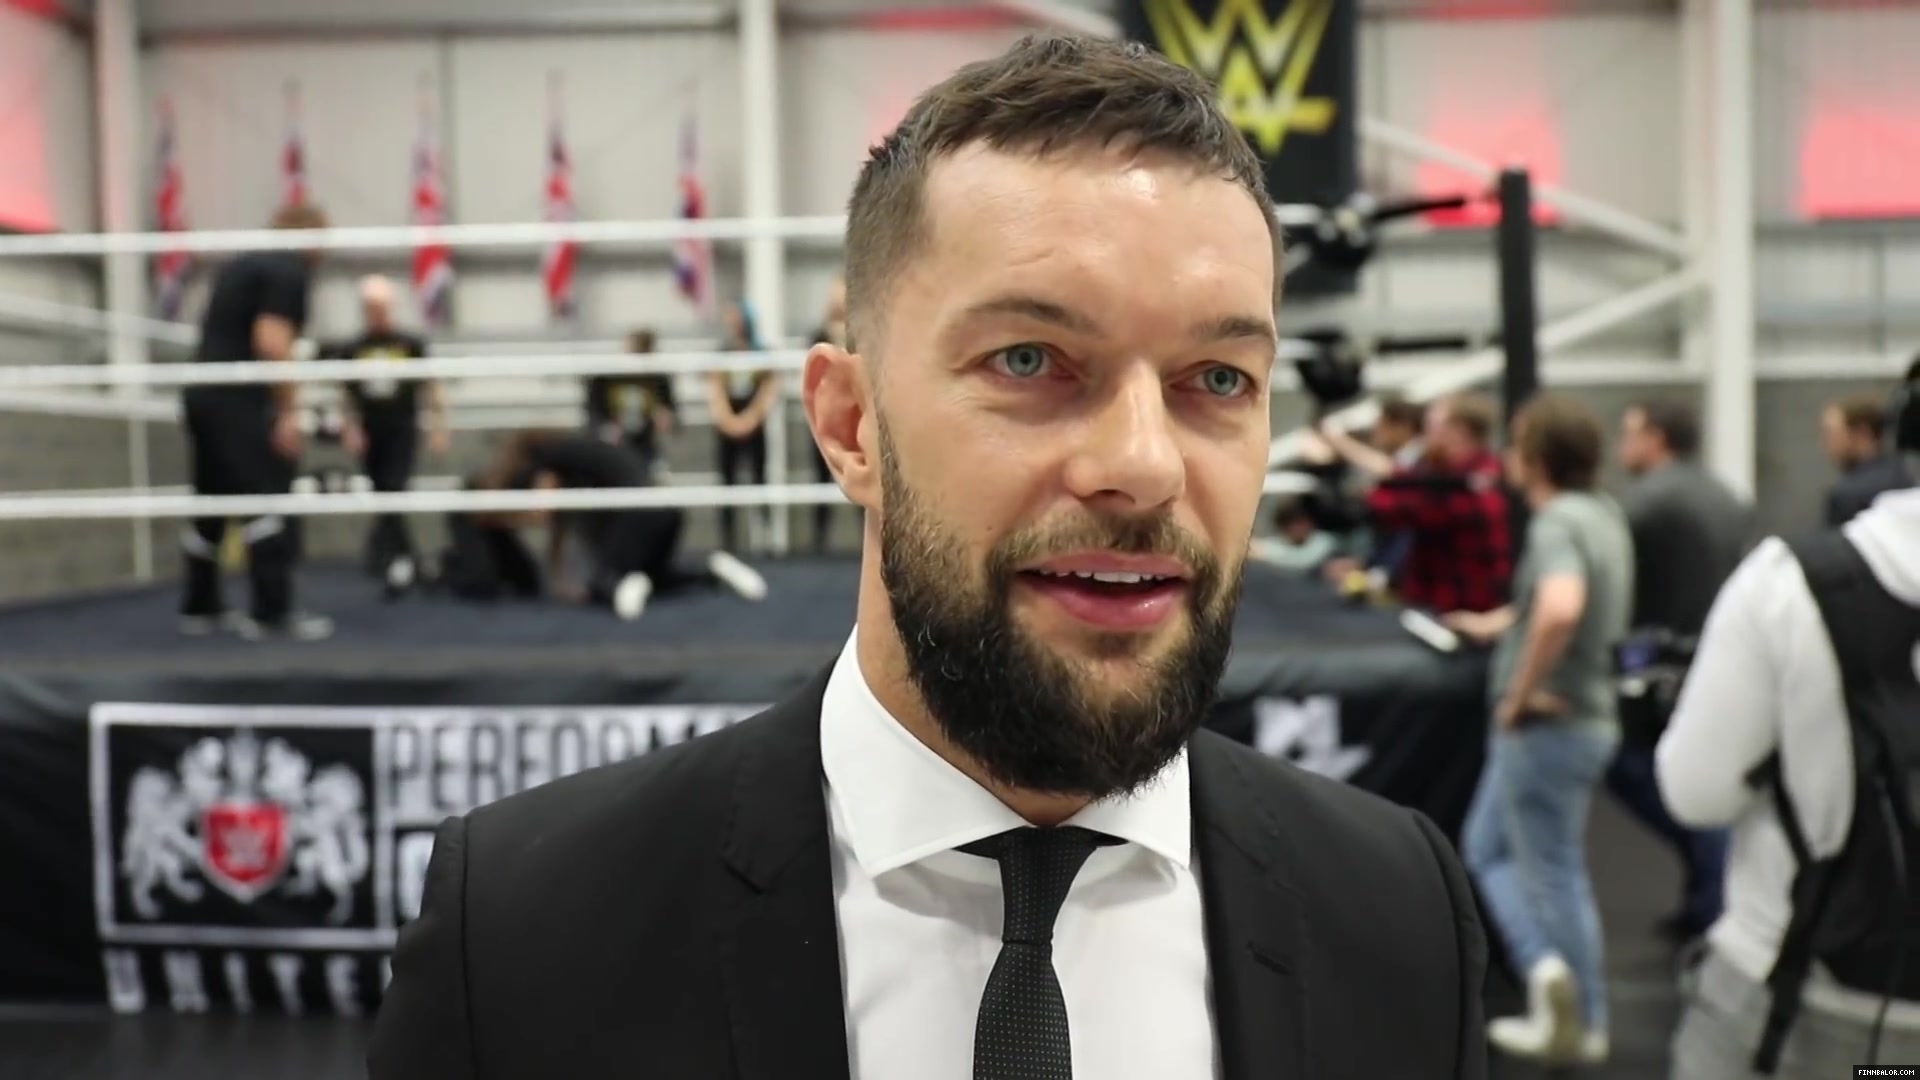 WWE_Superstar_FINN_BALOR_joins_MOUSTACHE_MOUNTAIN_at_the_opening_of_the_NXT_UK_PC_135.jpg